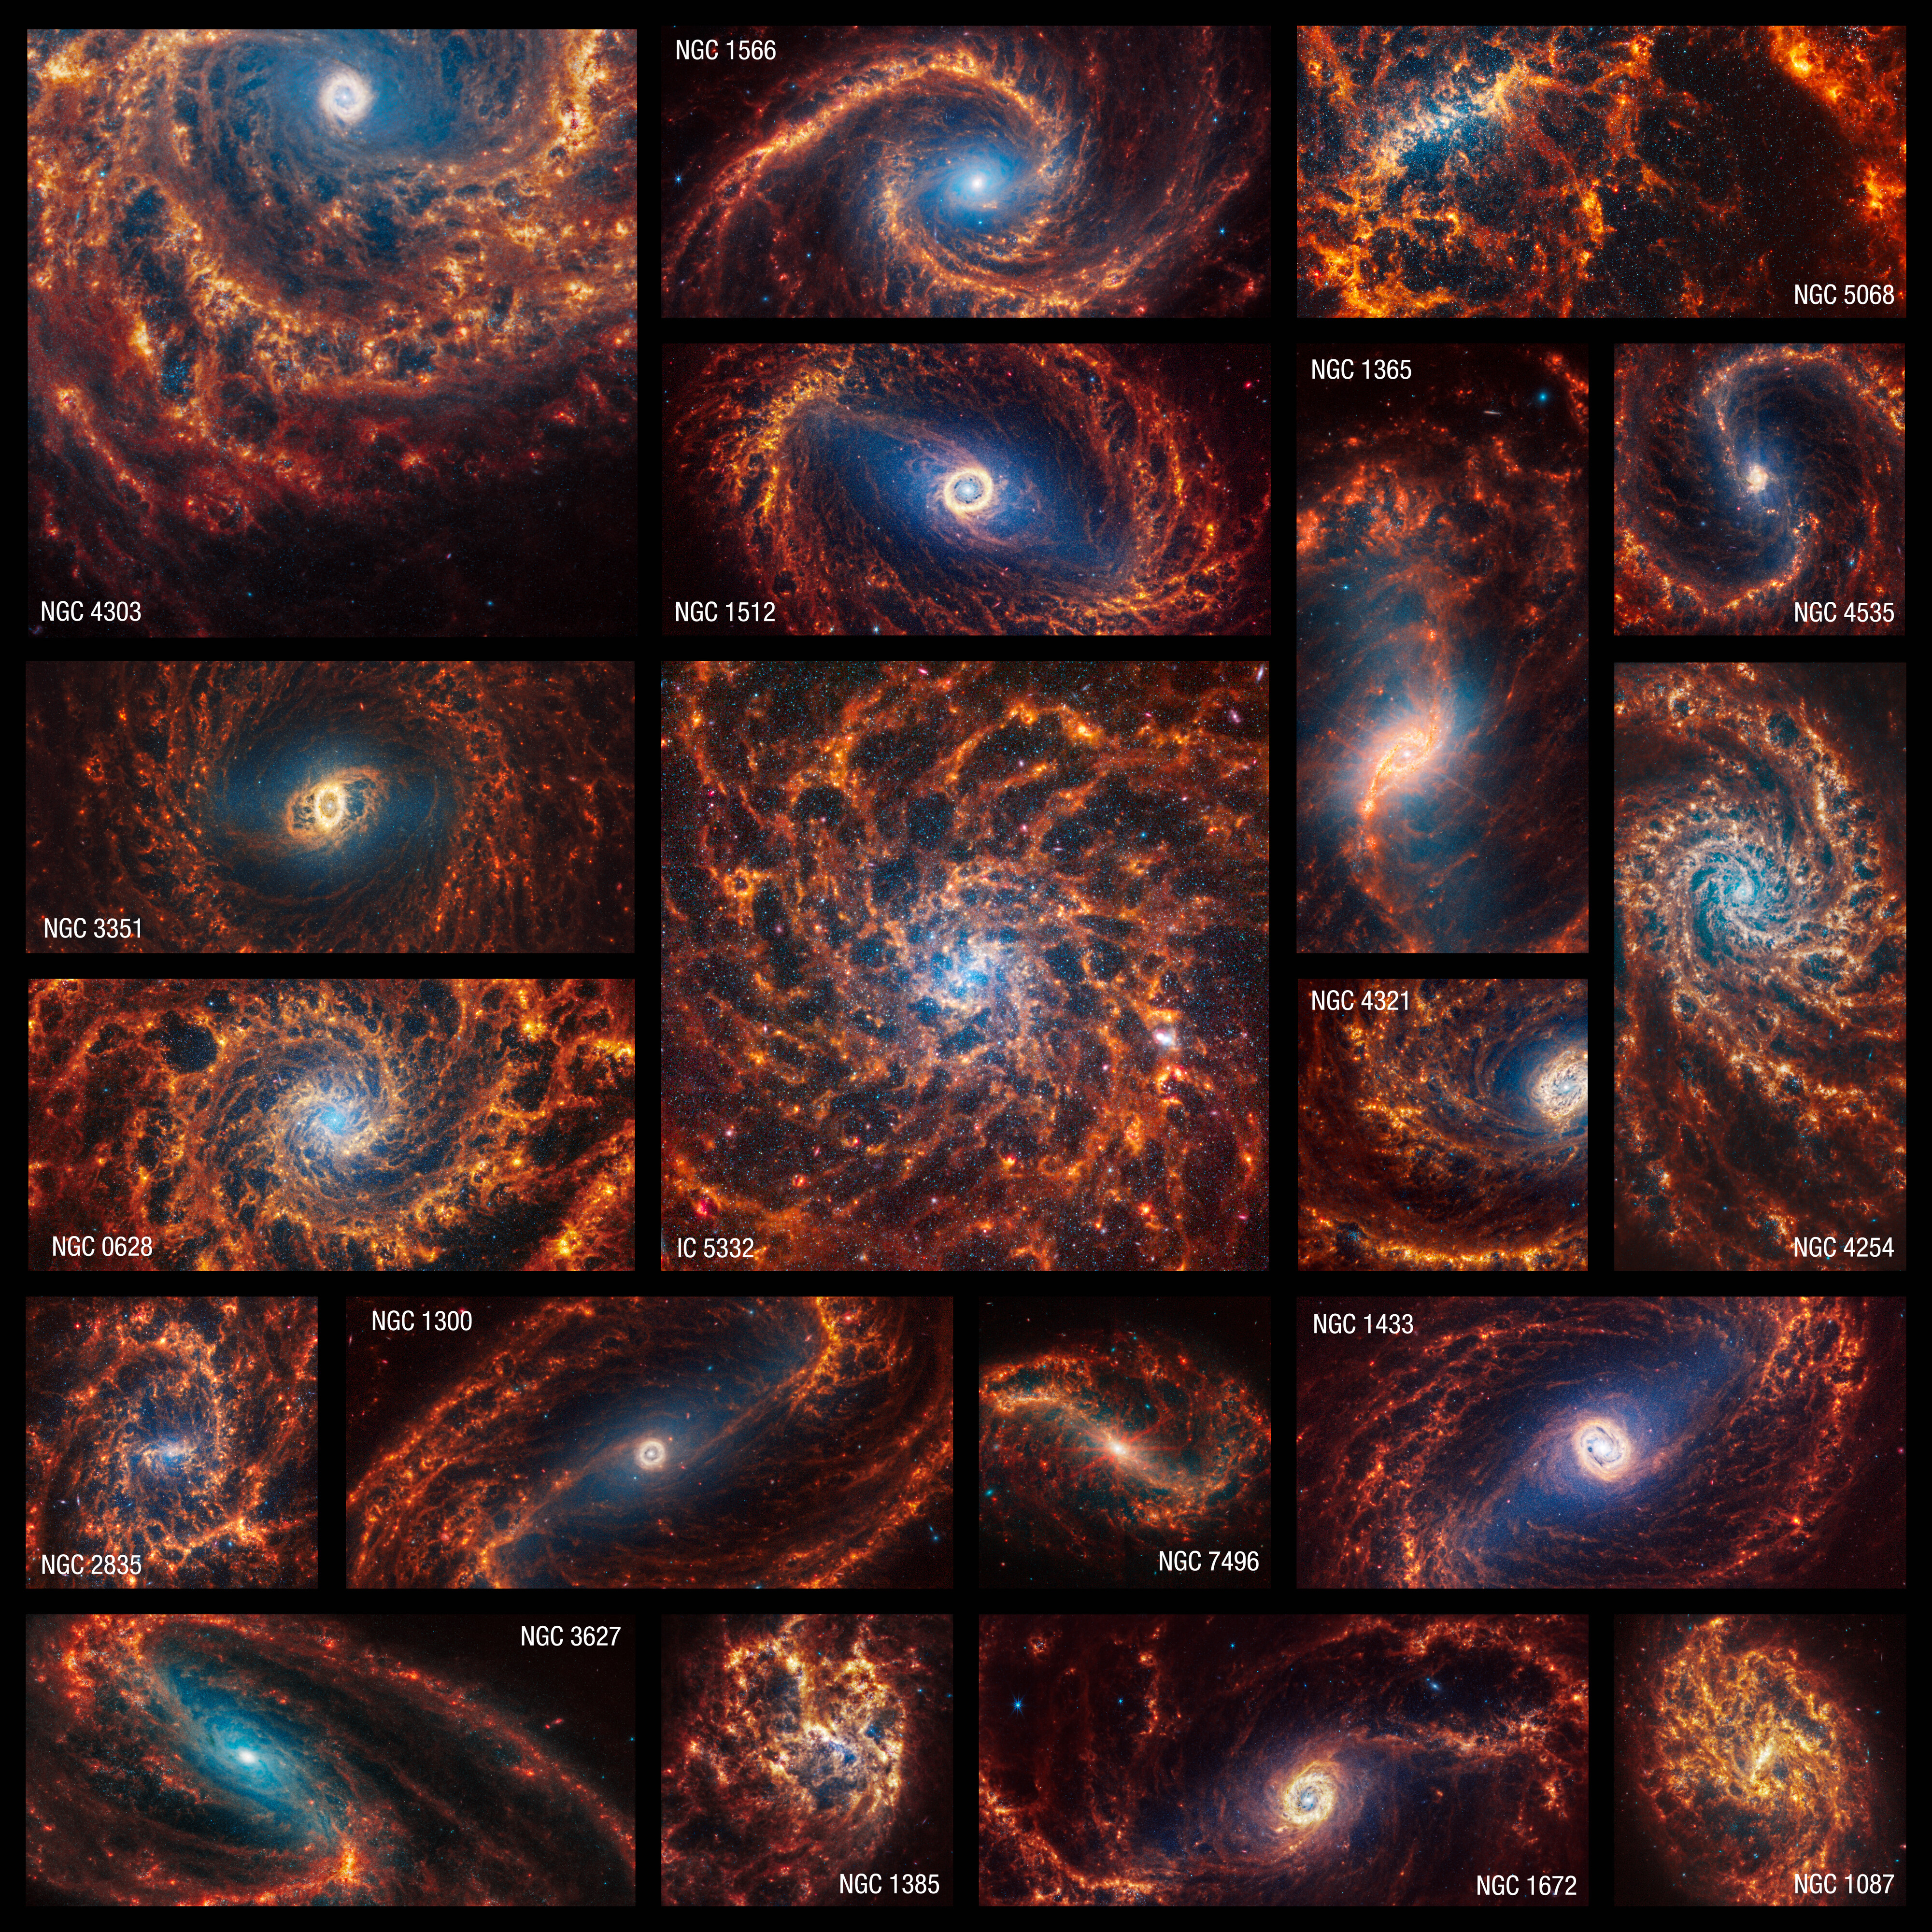 A mosaic image showing all 19 of the galaxies newly viewed by the James Webb Space Telescope